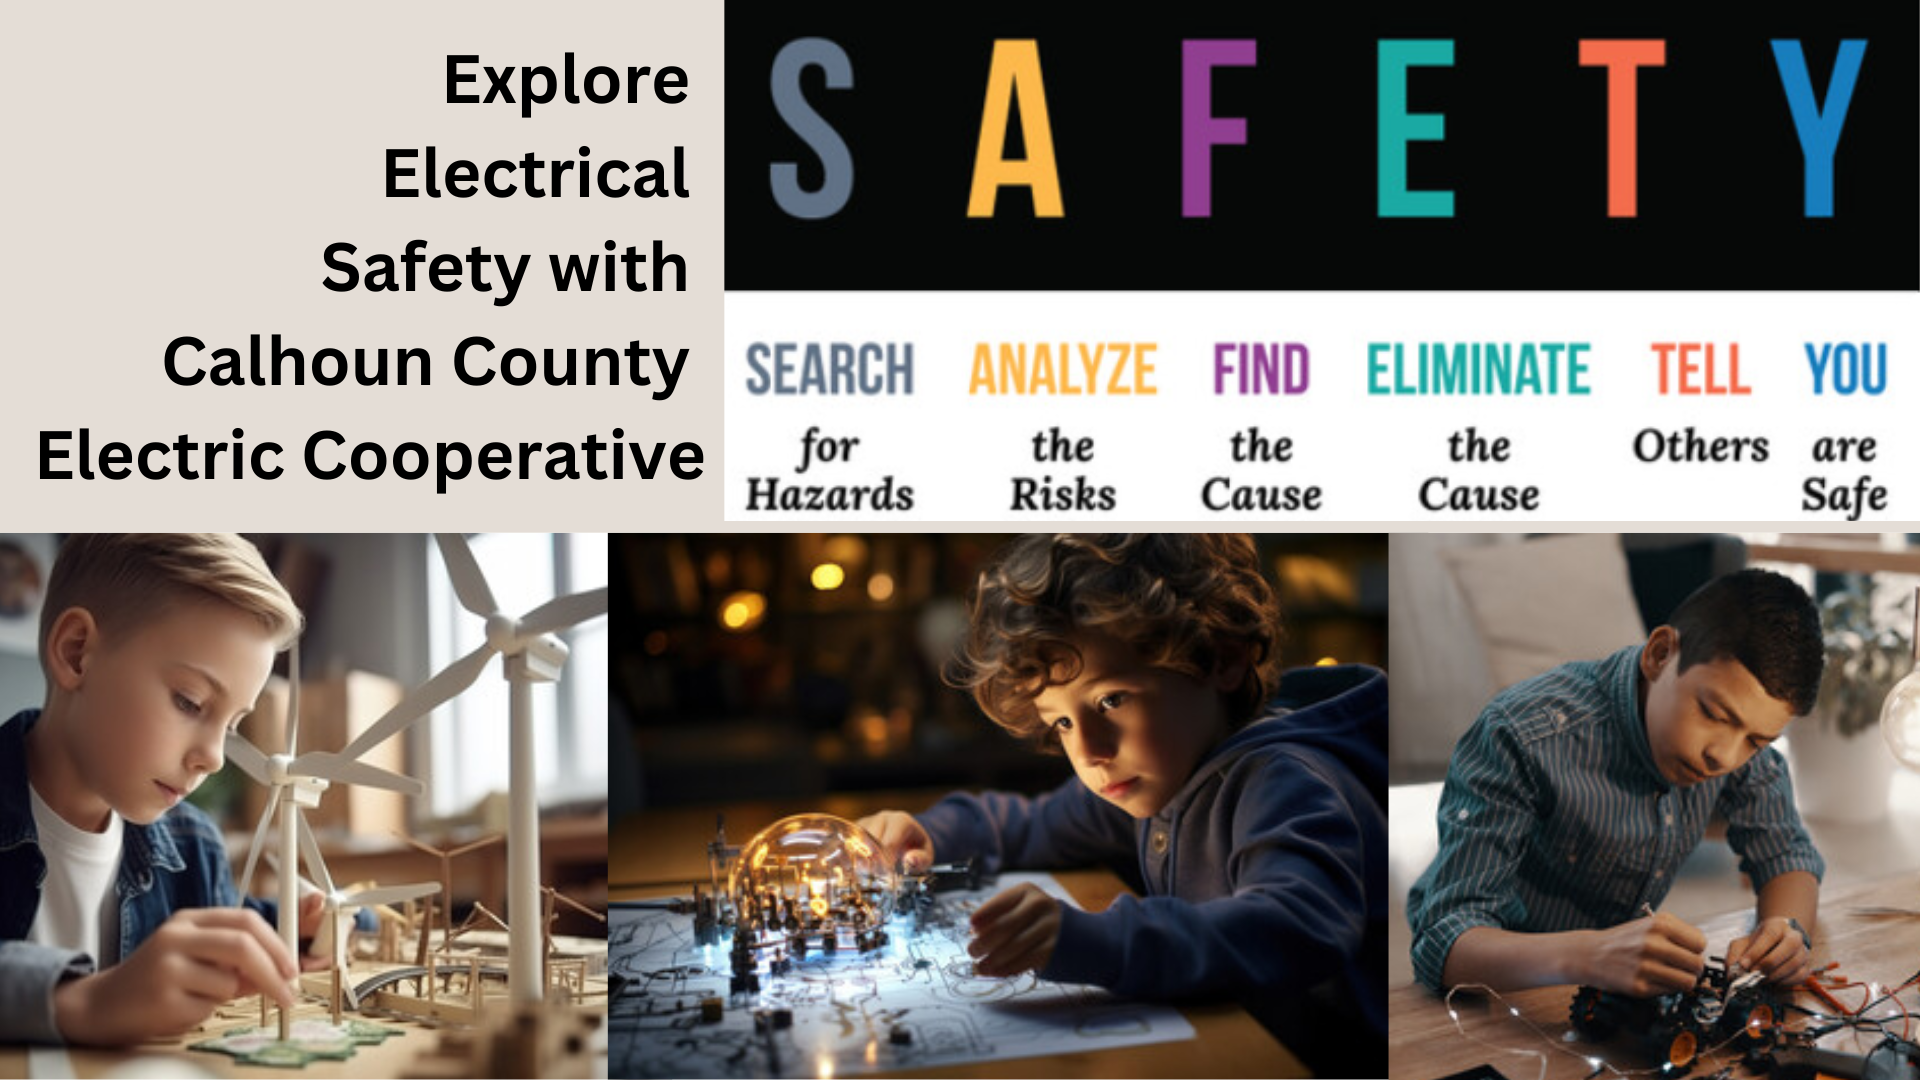 Explore Electricity with us